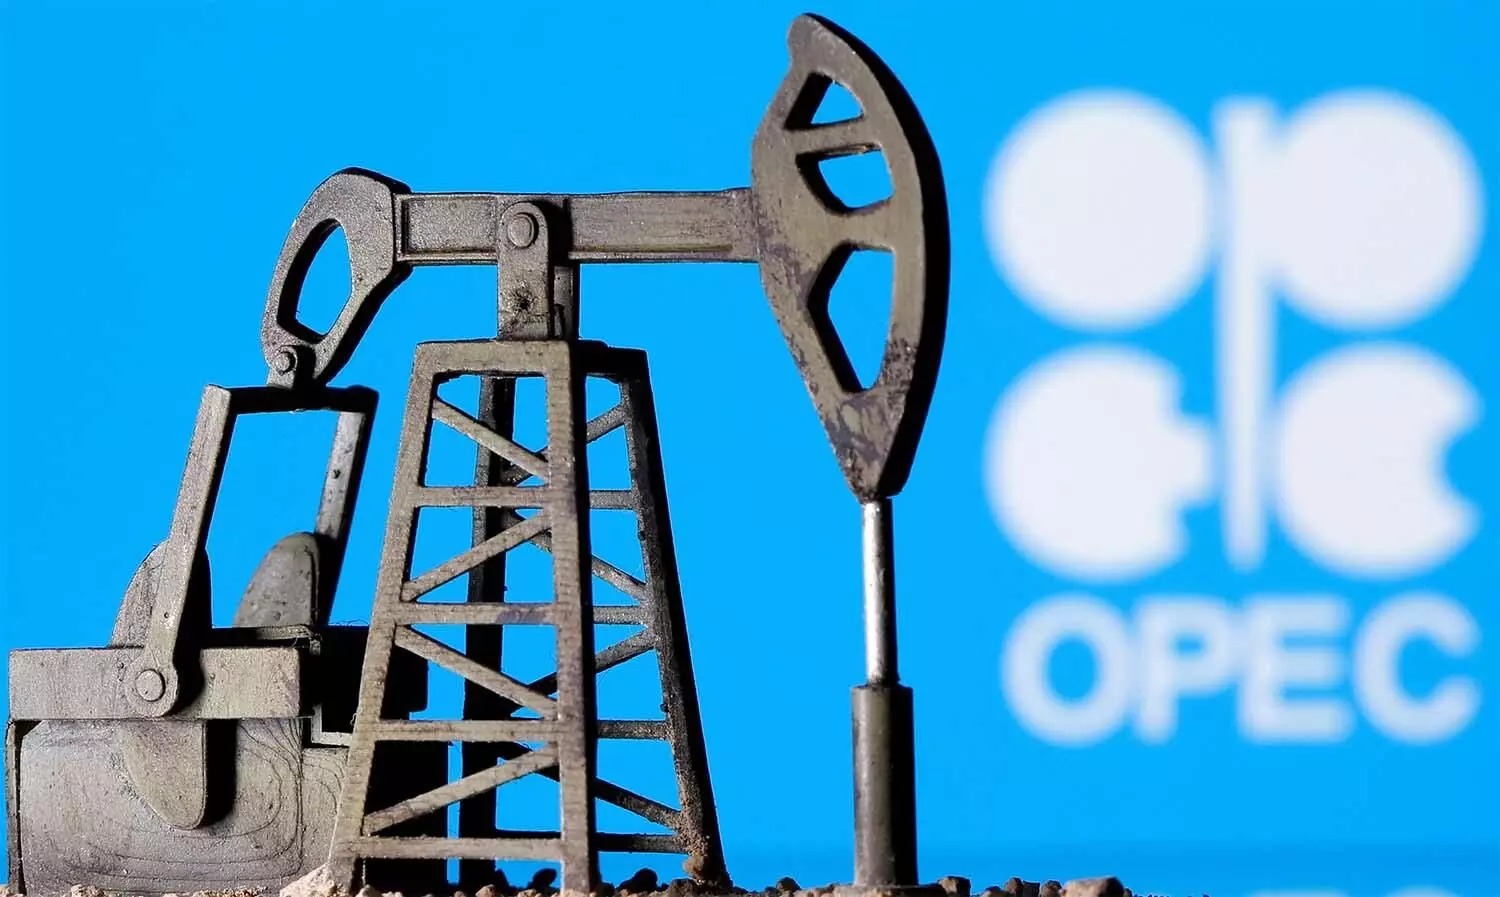 OPEC+ Compliance With Oil Cuts in March Largely due to Saudi Arabia – IEA